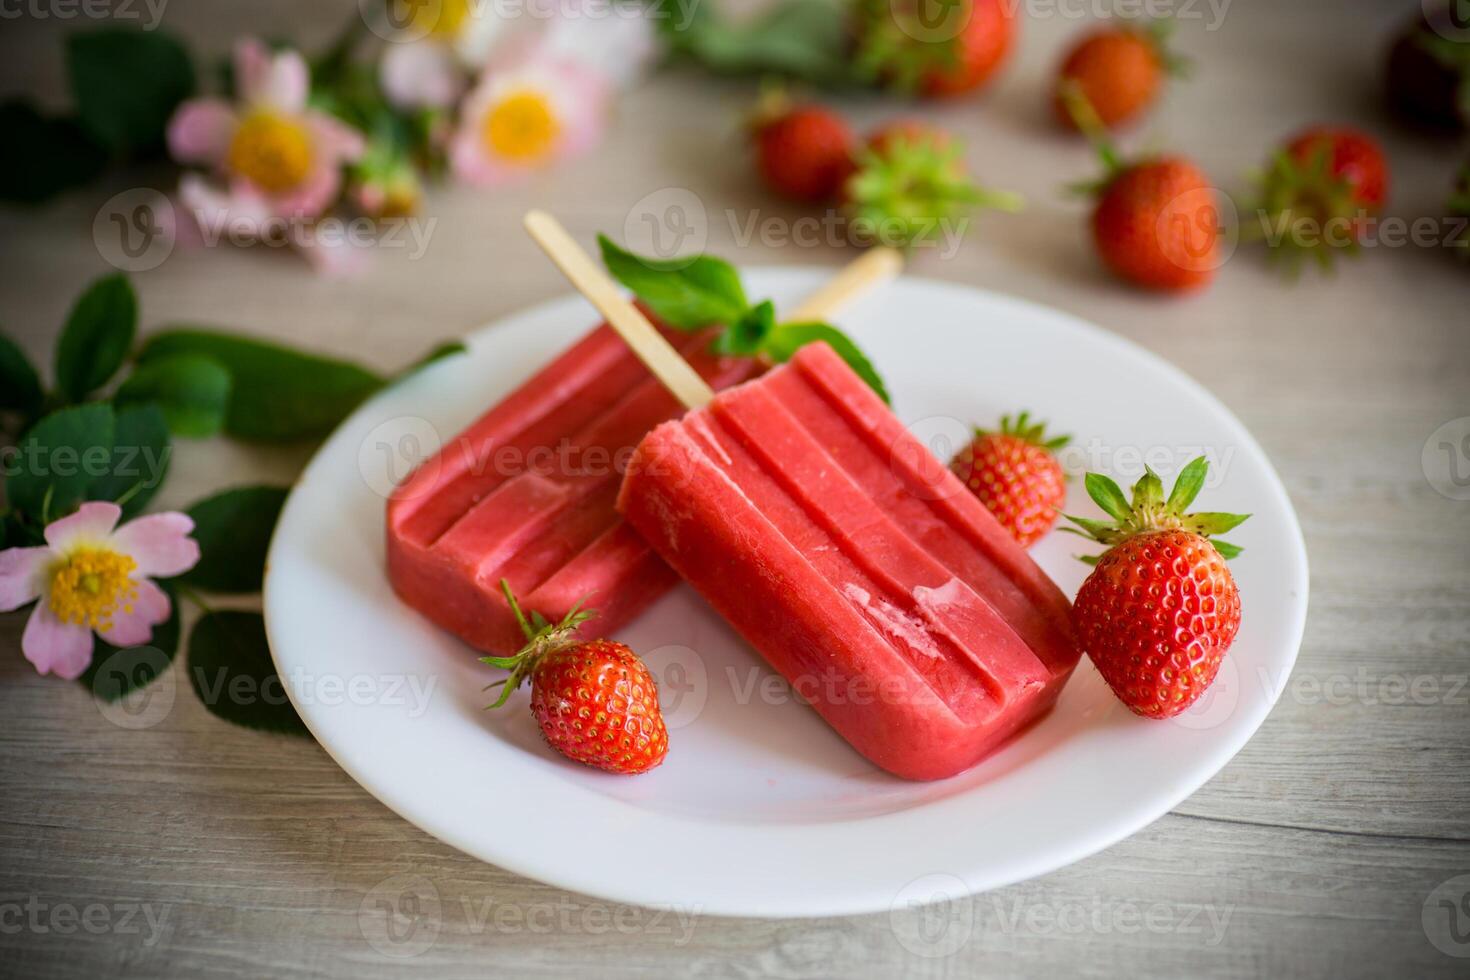 homemade strawberry ice cream on a stick made from fresh strawberries in a plate photo